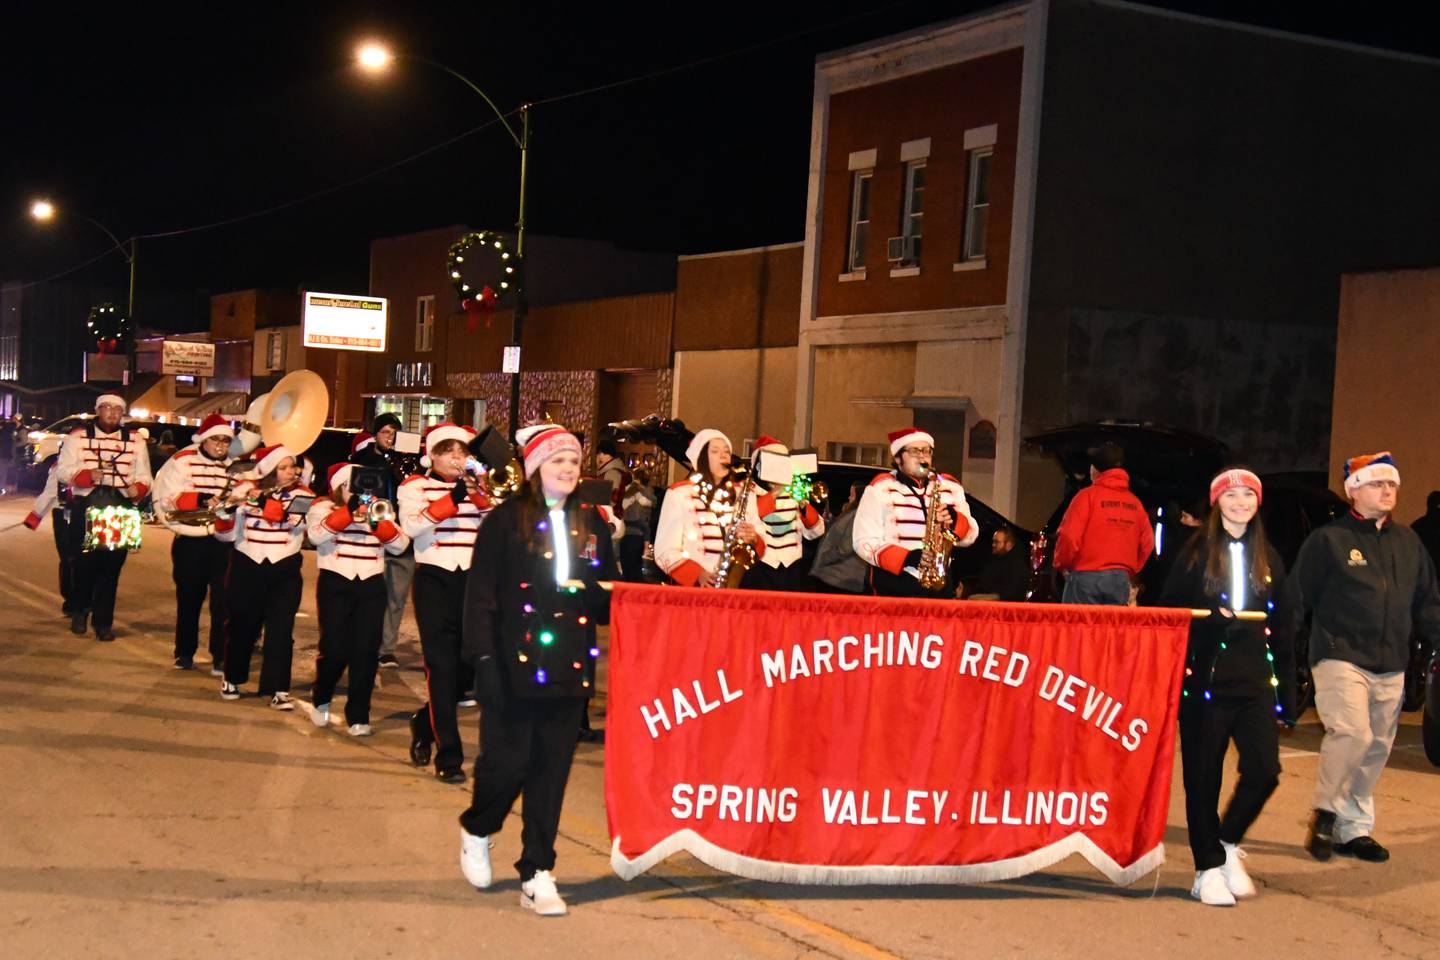 The Hall High School Marching Red Devils performing during Saturday's Lighted Christmas Parade in Spring Valley